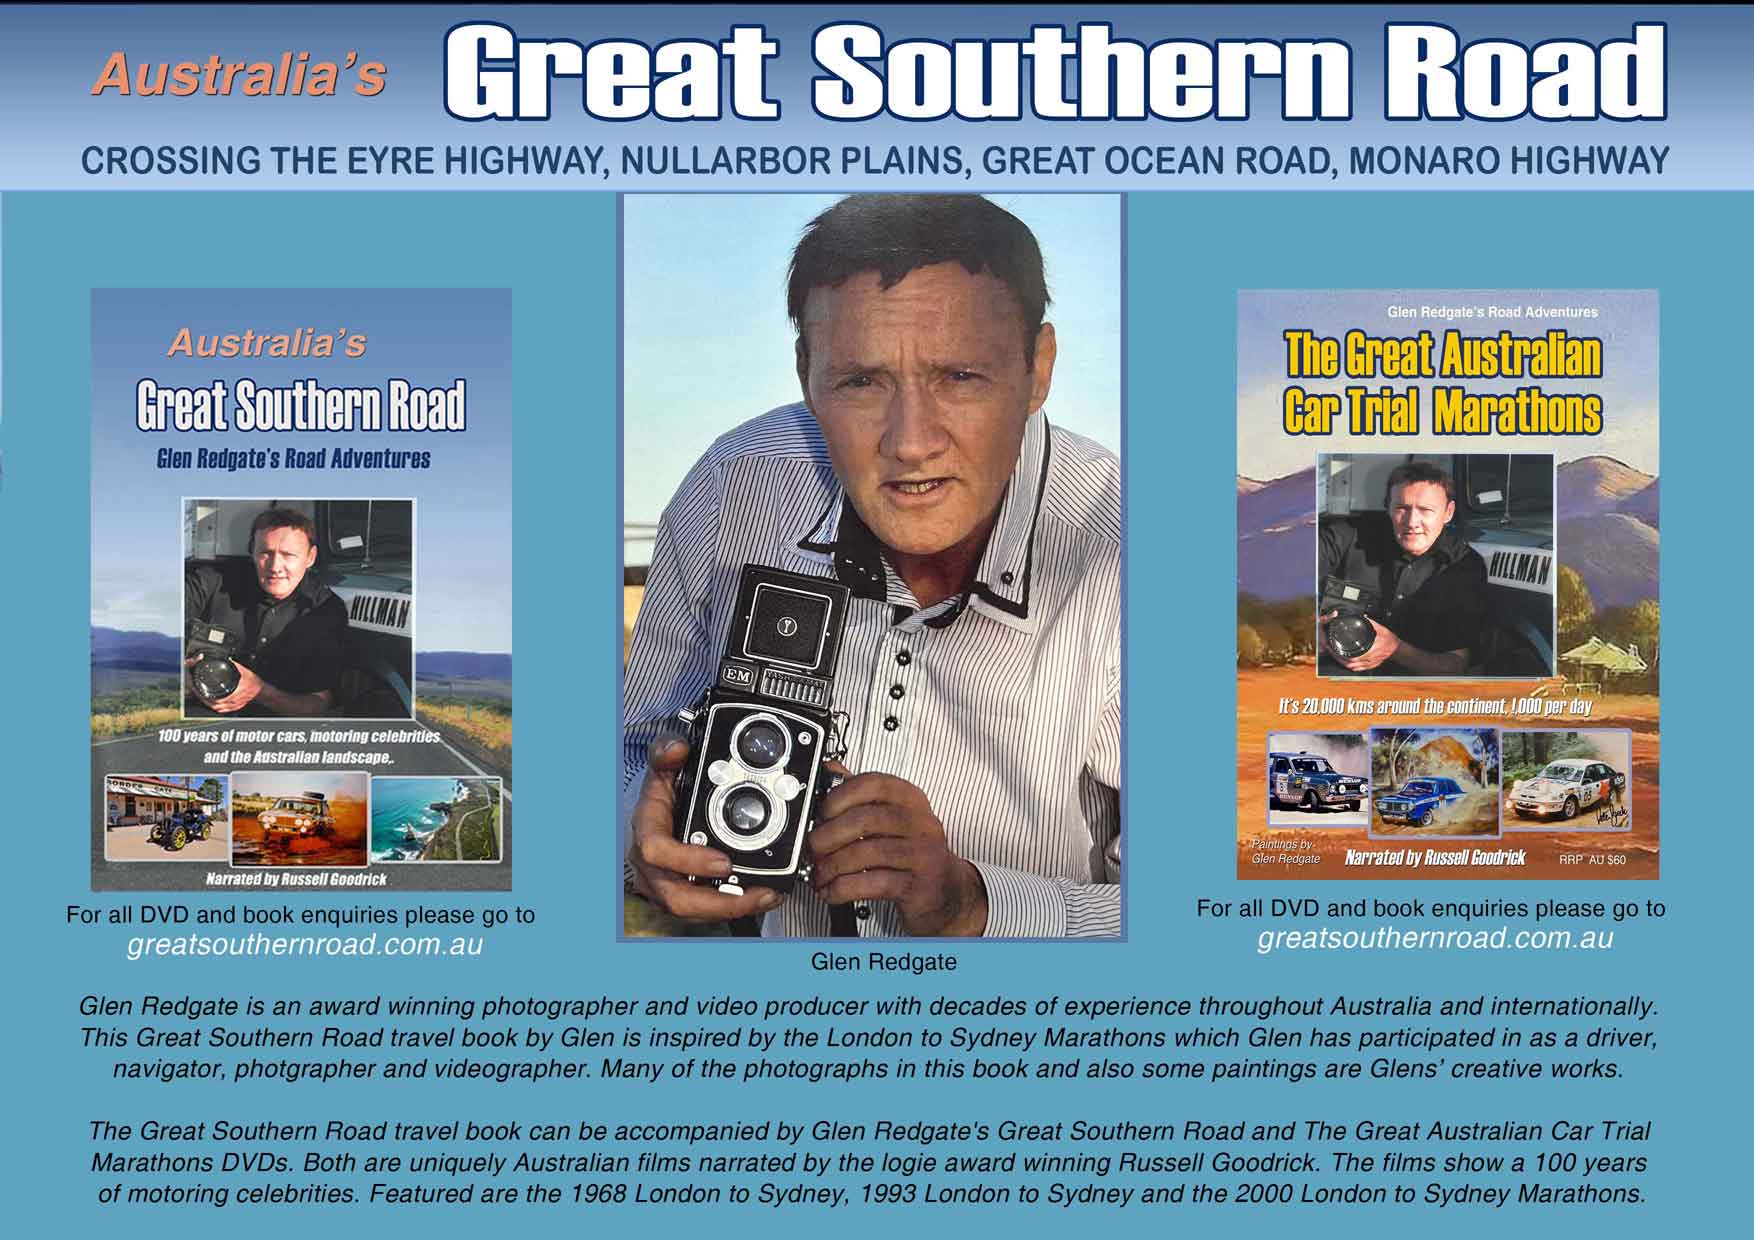 Great Southern Road - Glen Redgate Introduction